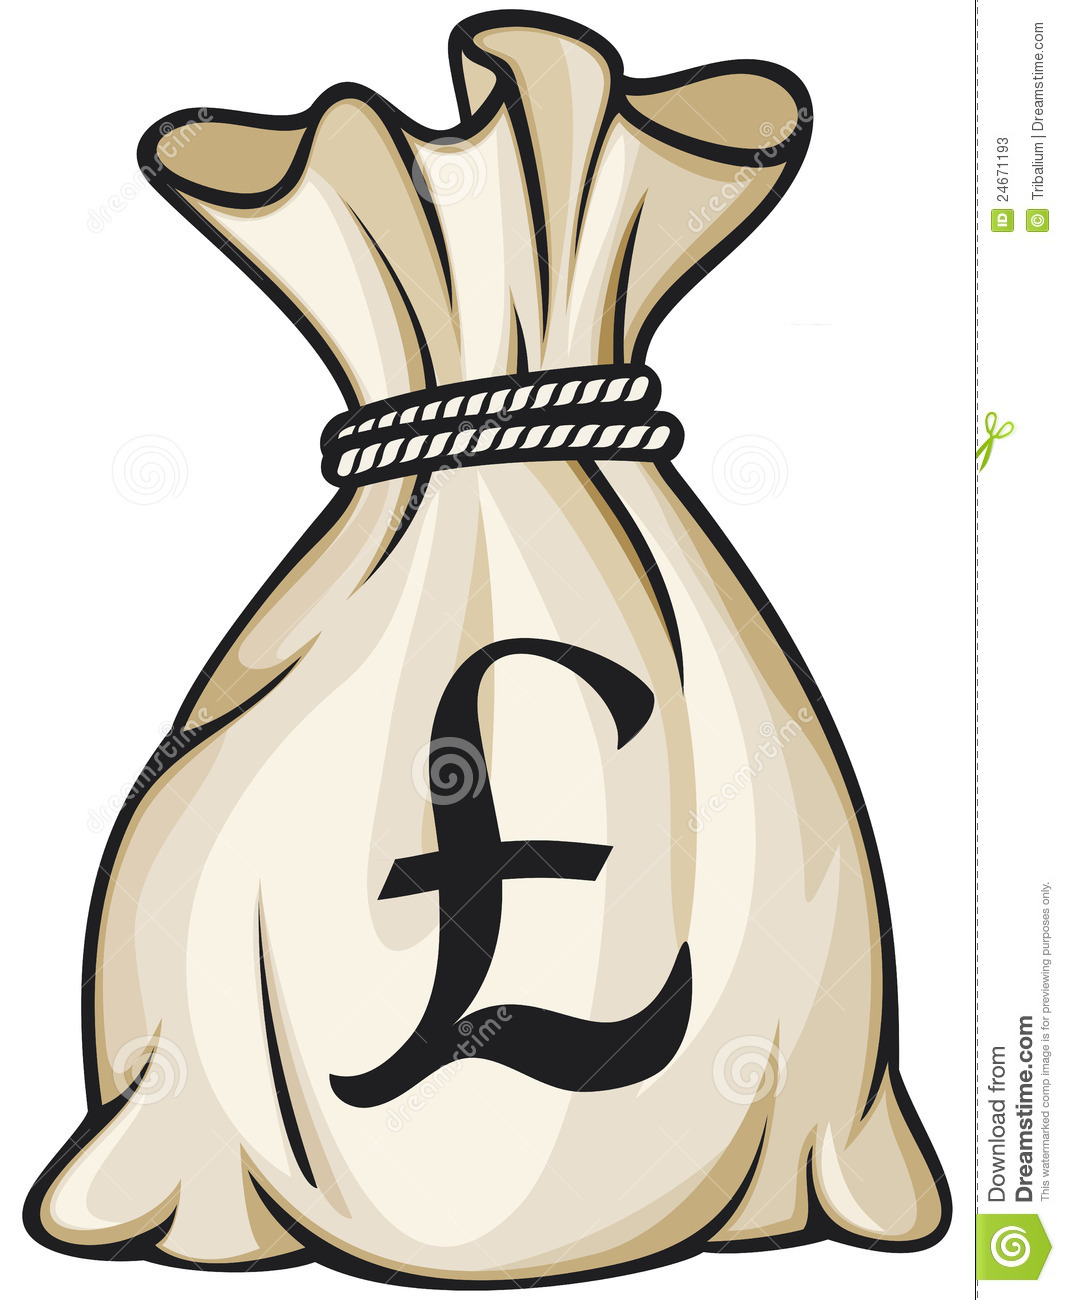 Money Bag With Pound Sign Vector Illustration